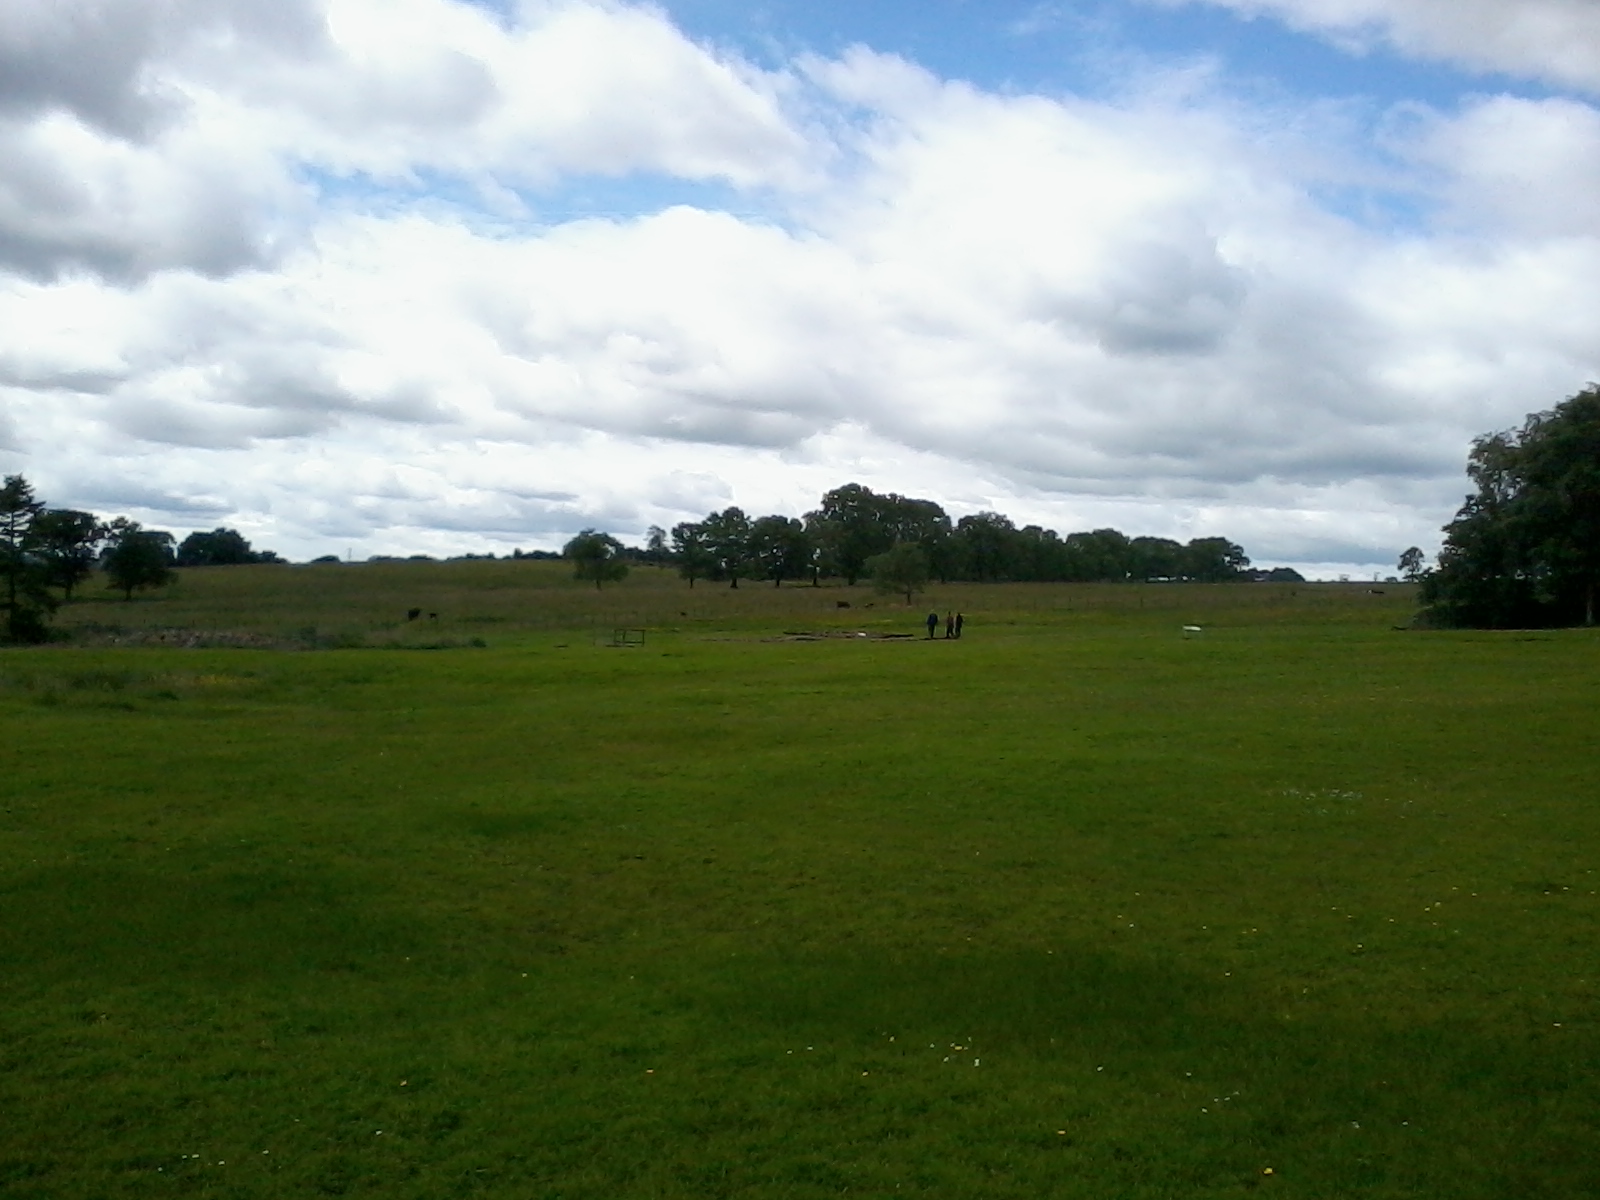 a large open field with some cows in the distance